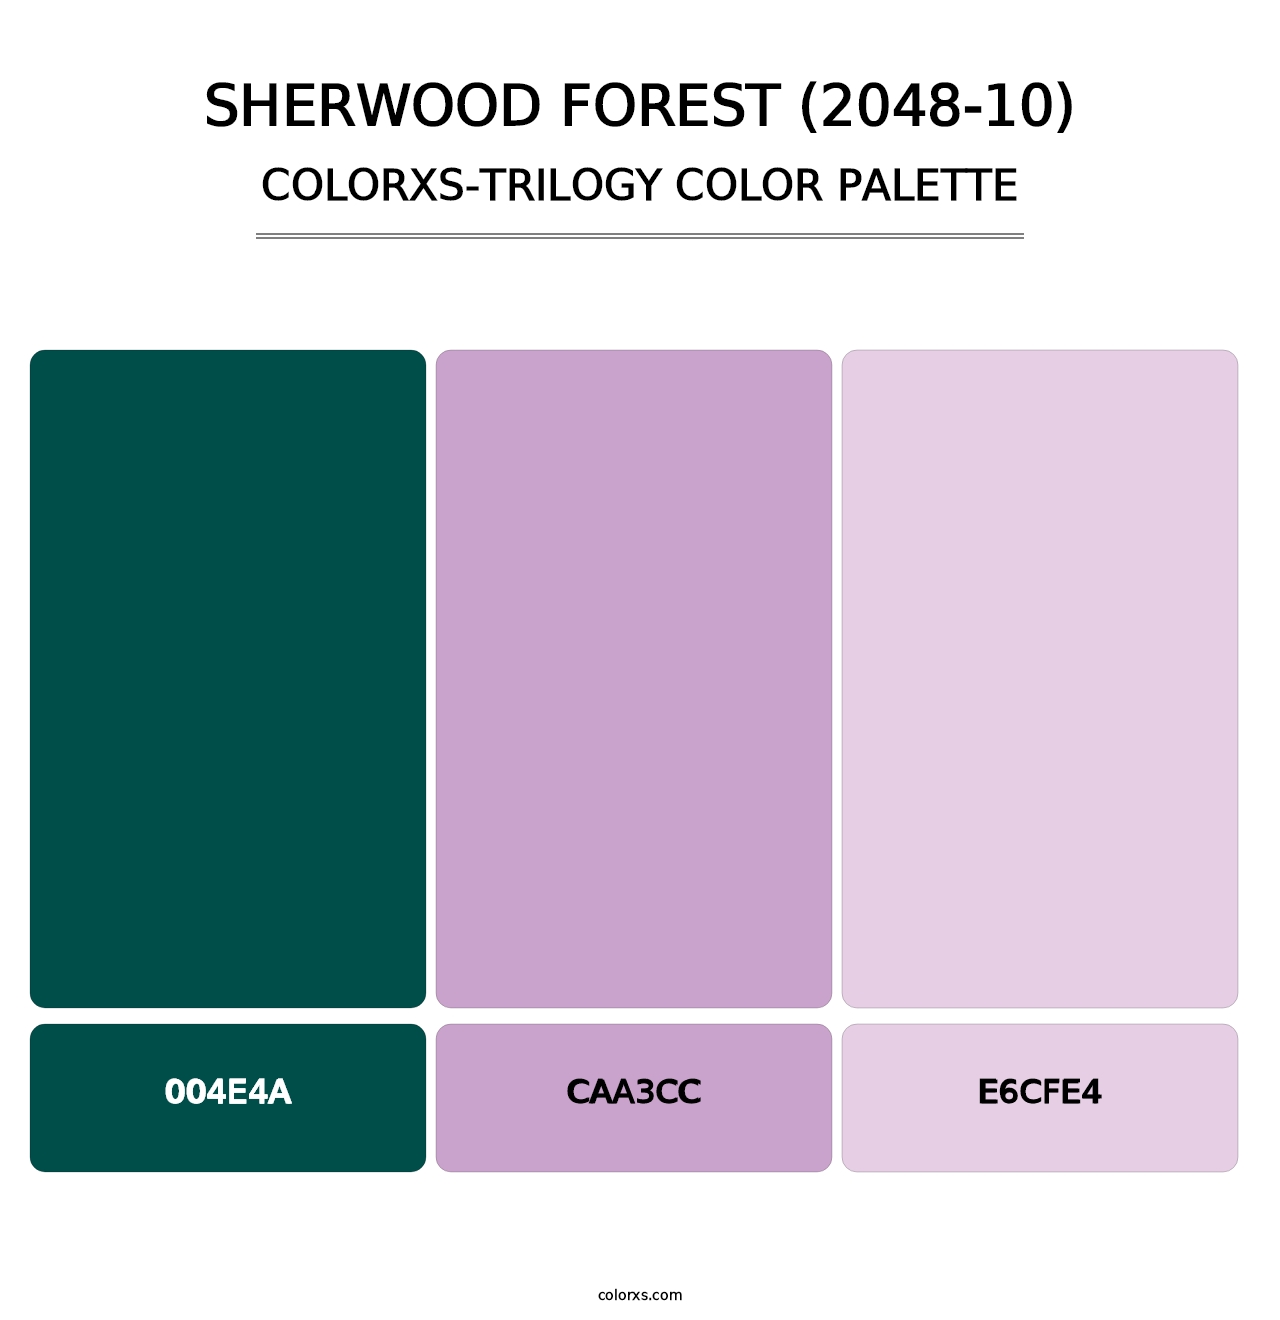 Sherwood Forest (2048-10) - Colorxs Trilogy Palette